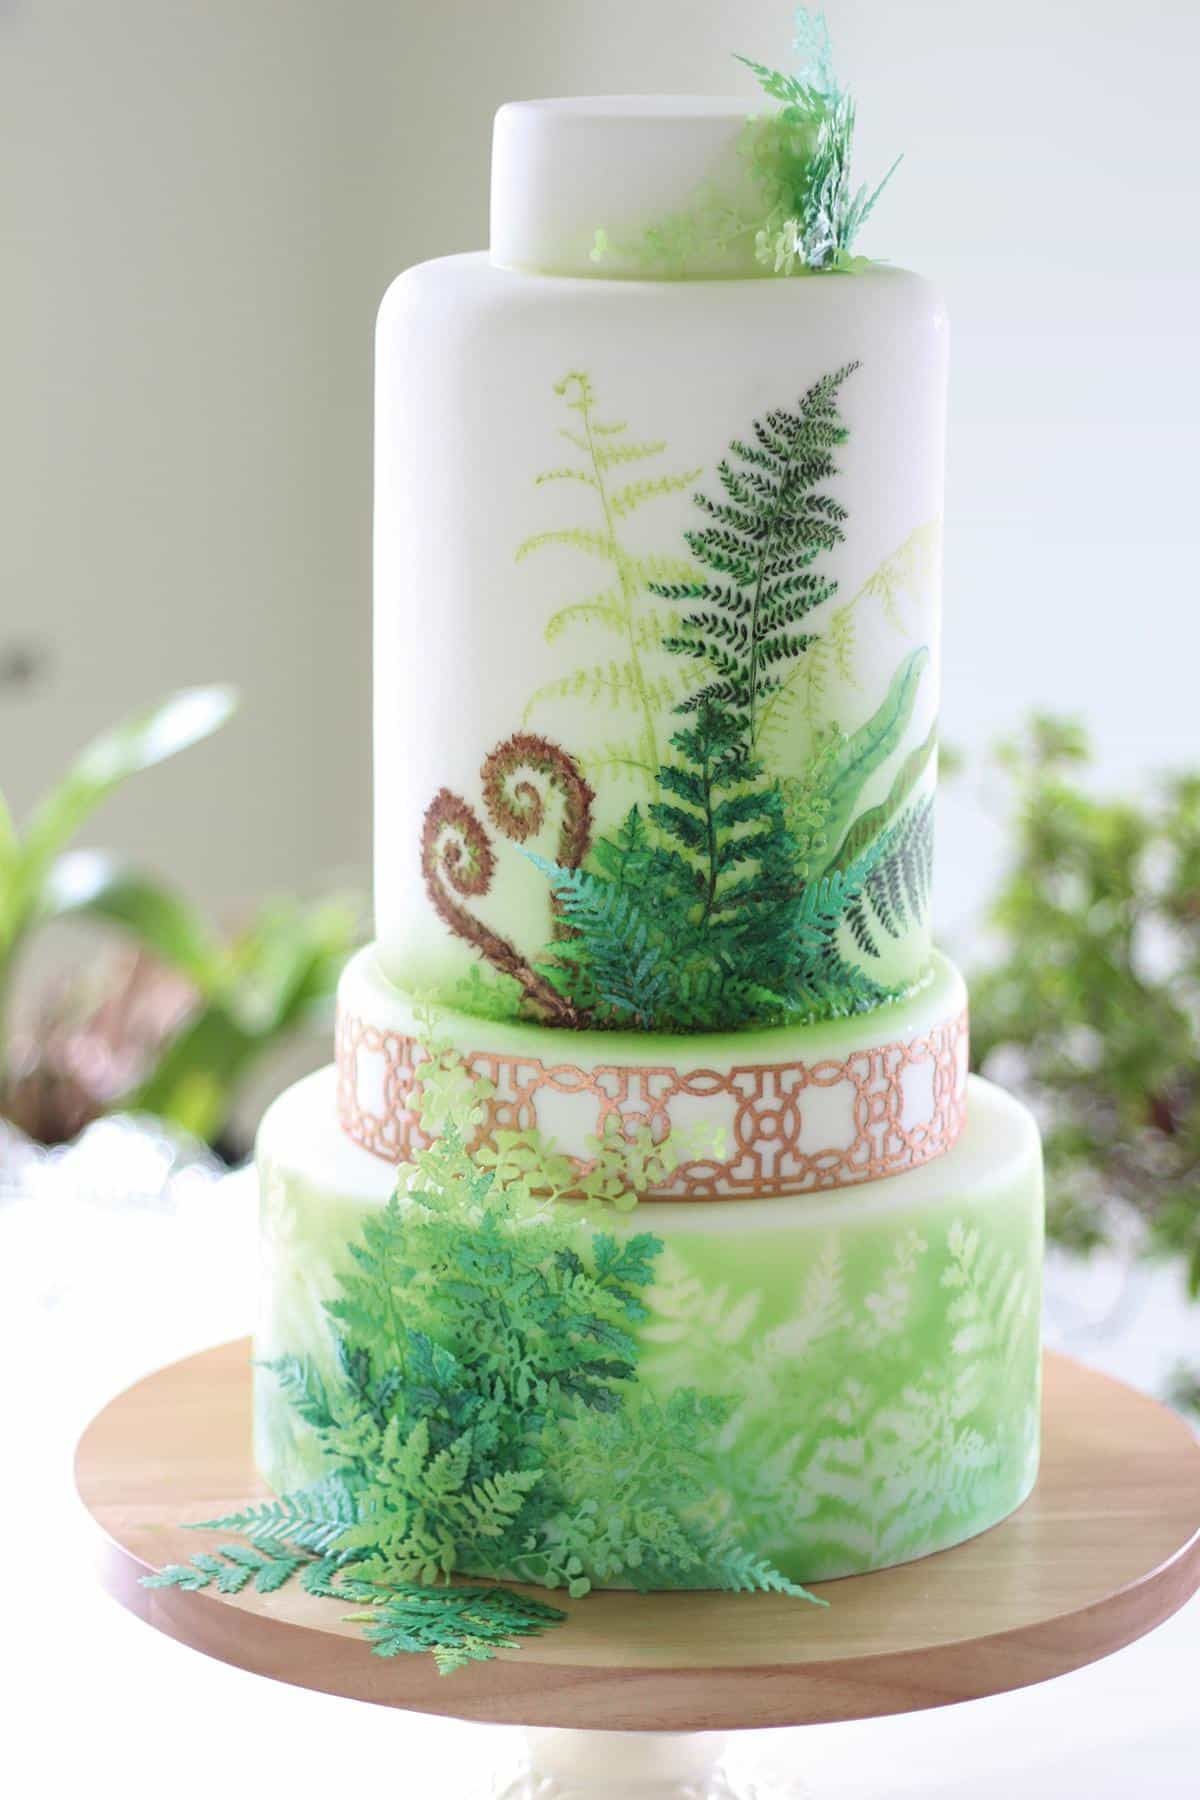 Green Floral Wedding Cake (View 23 of 25)